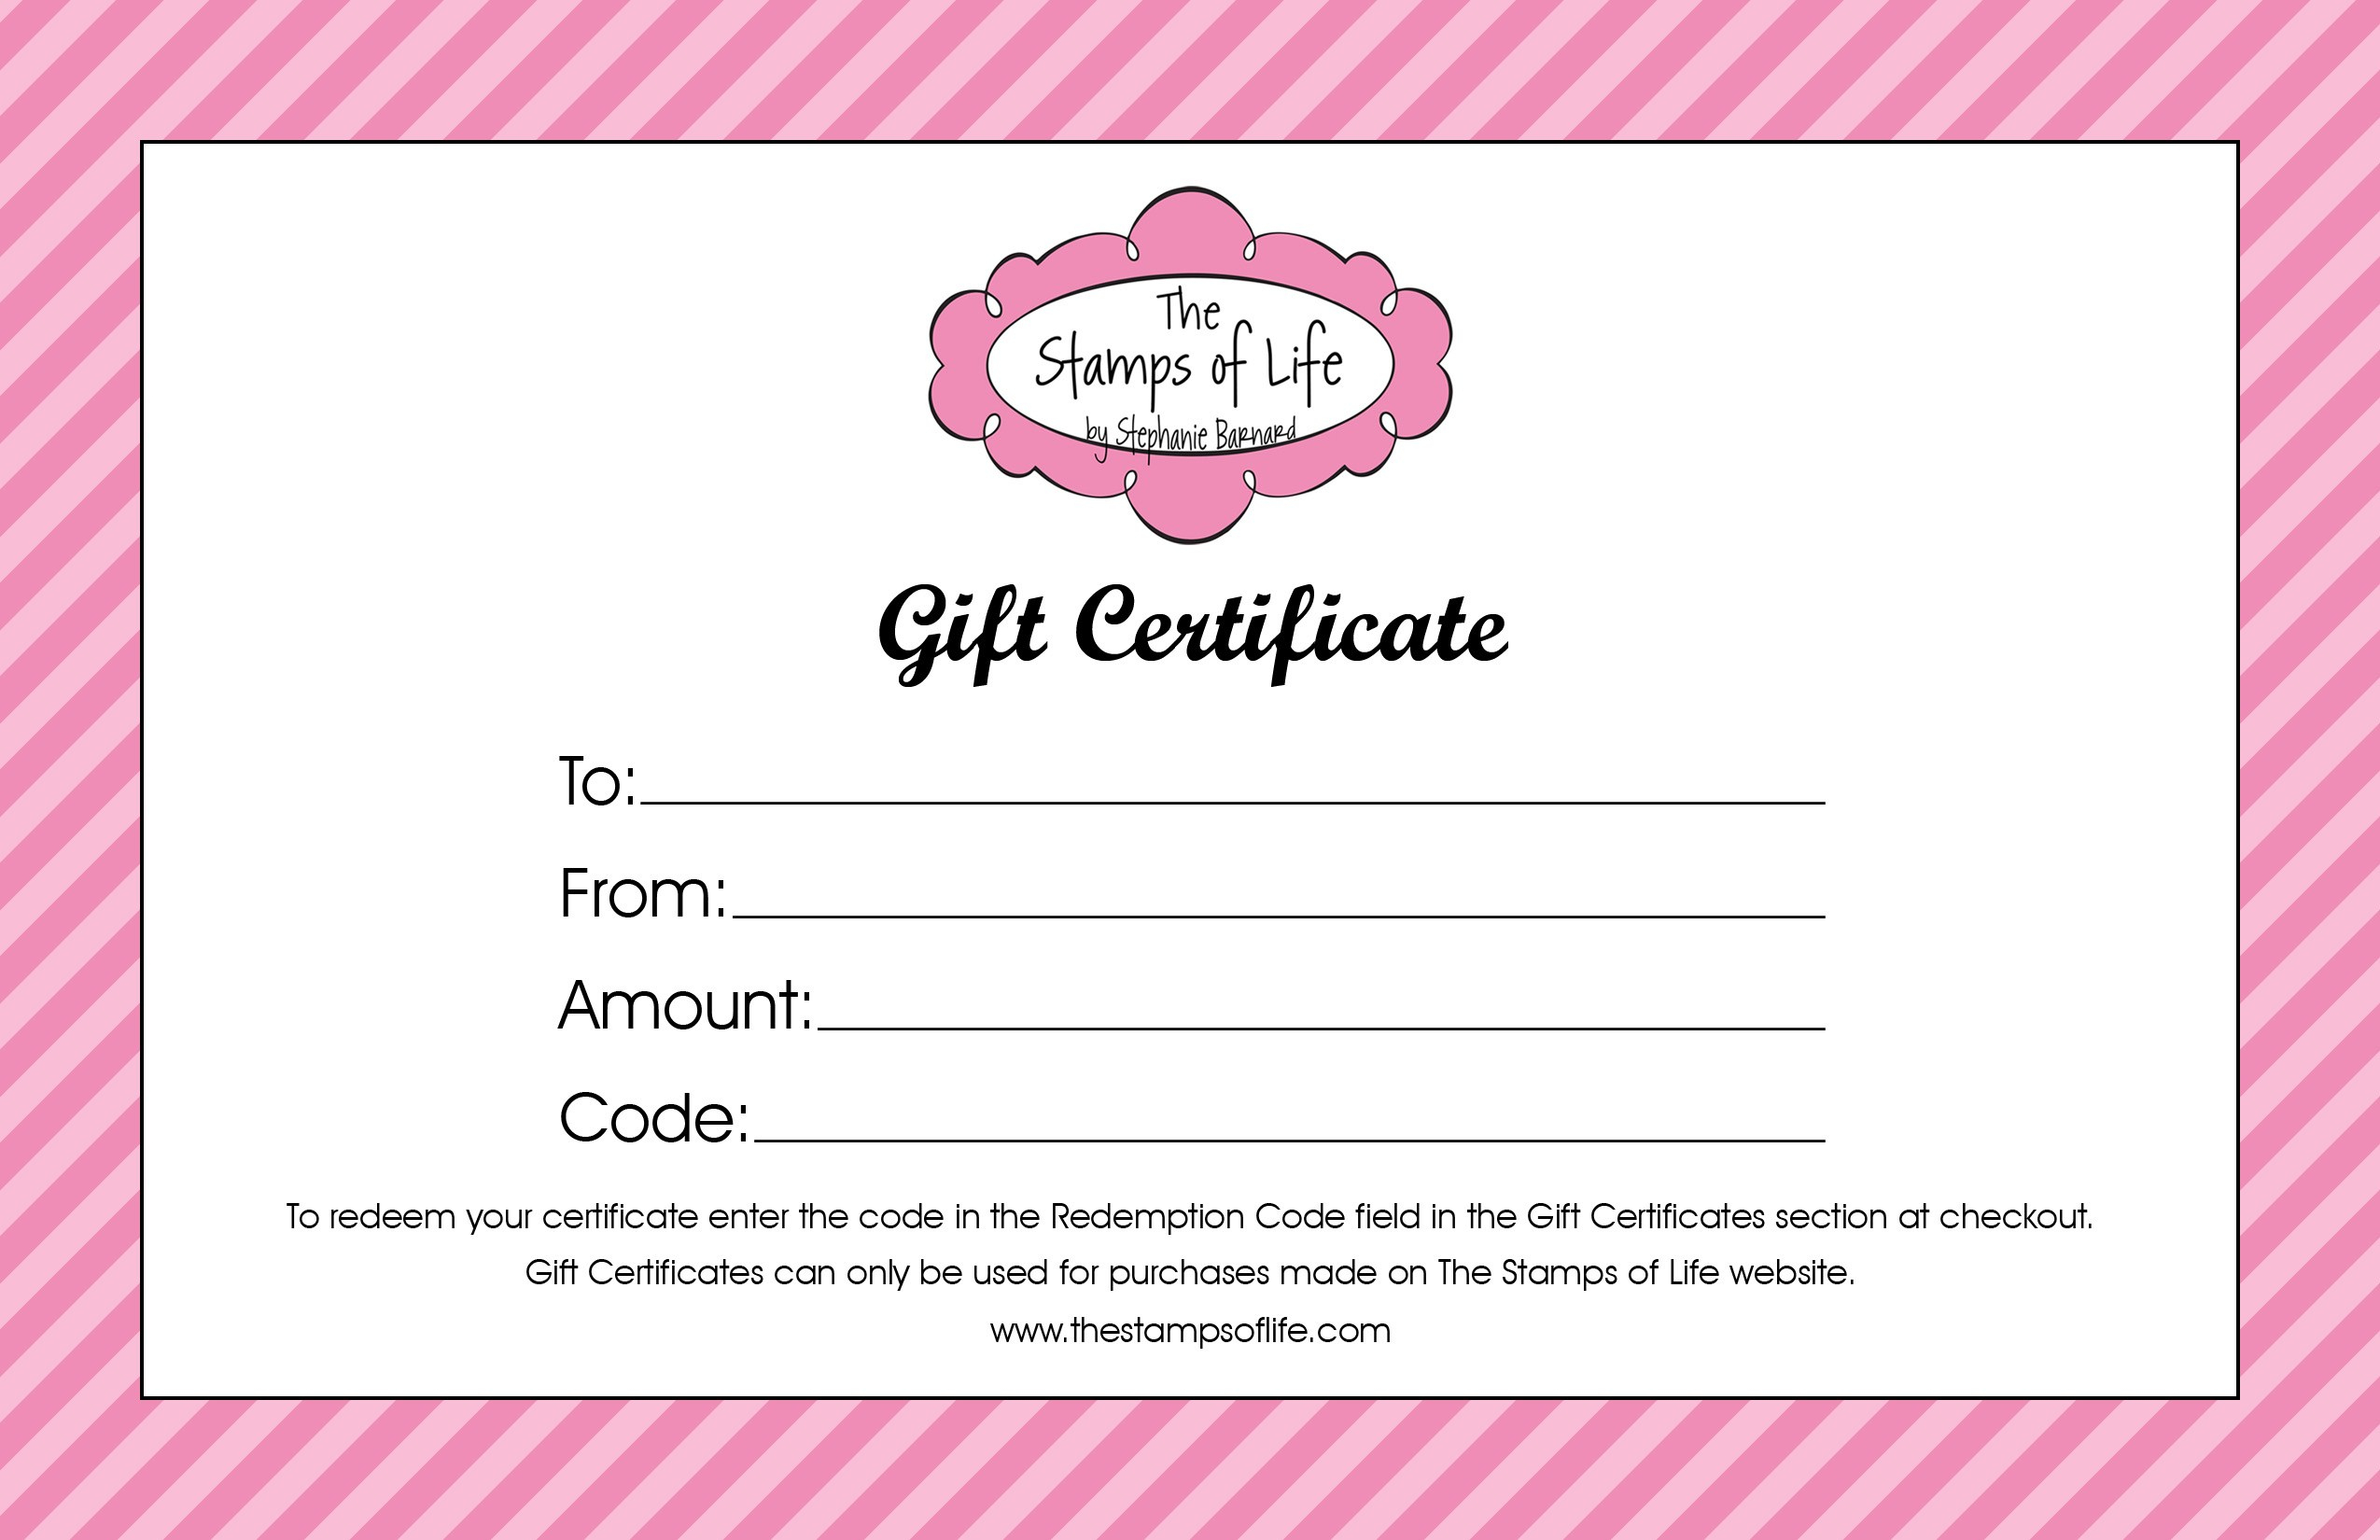 005 Free Gift Certificate Sample 641Fit25502C1650Ssl1 Template Ideas - Free Printable Gift Certificates For Hair Salon